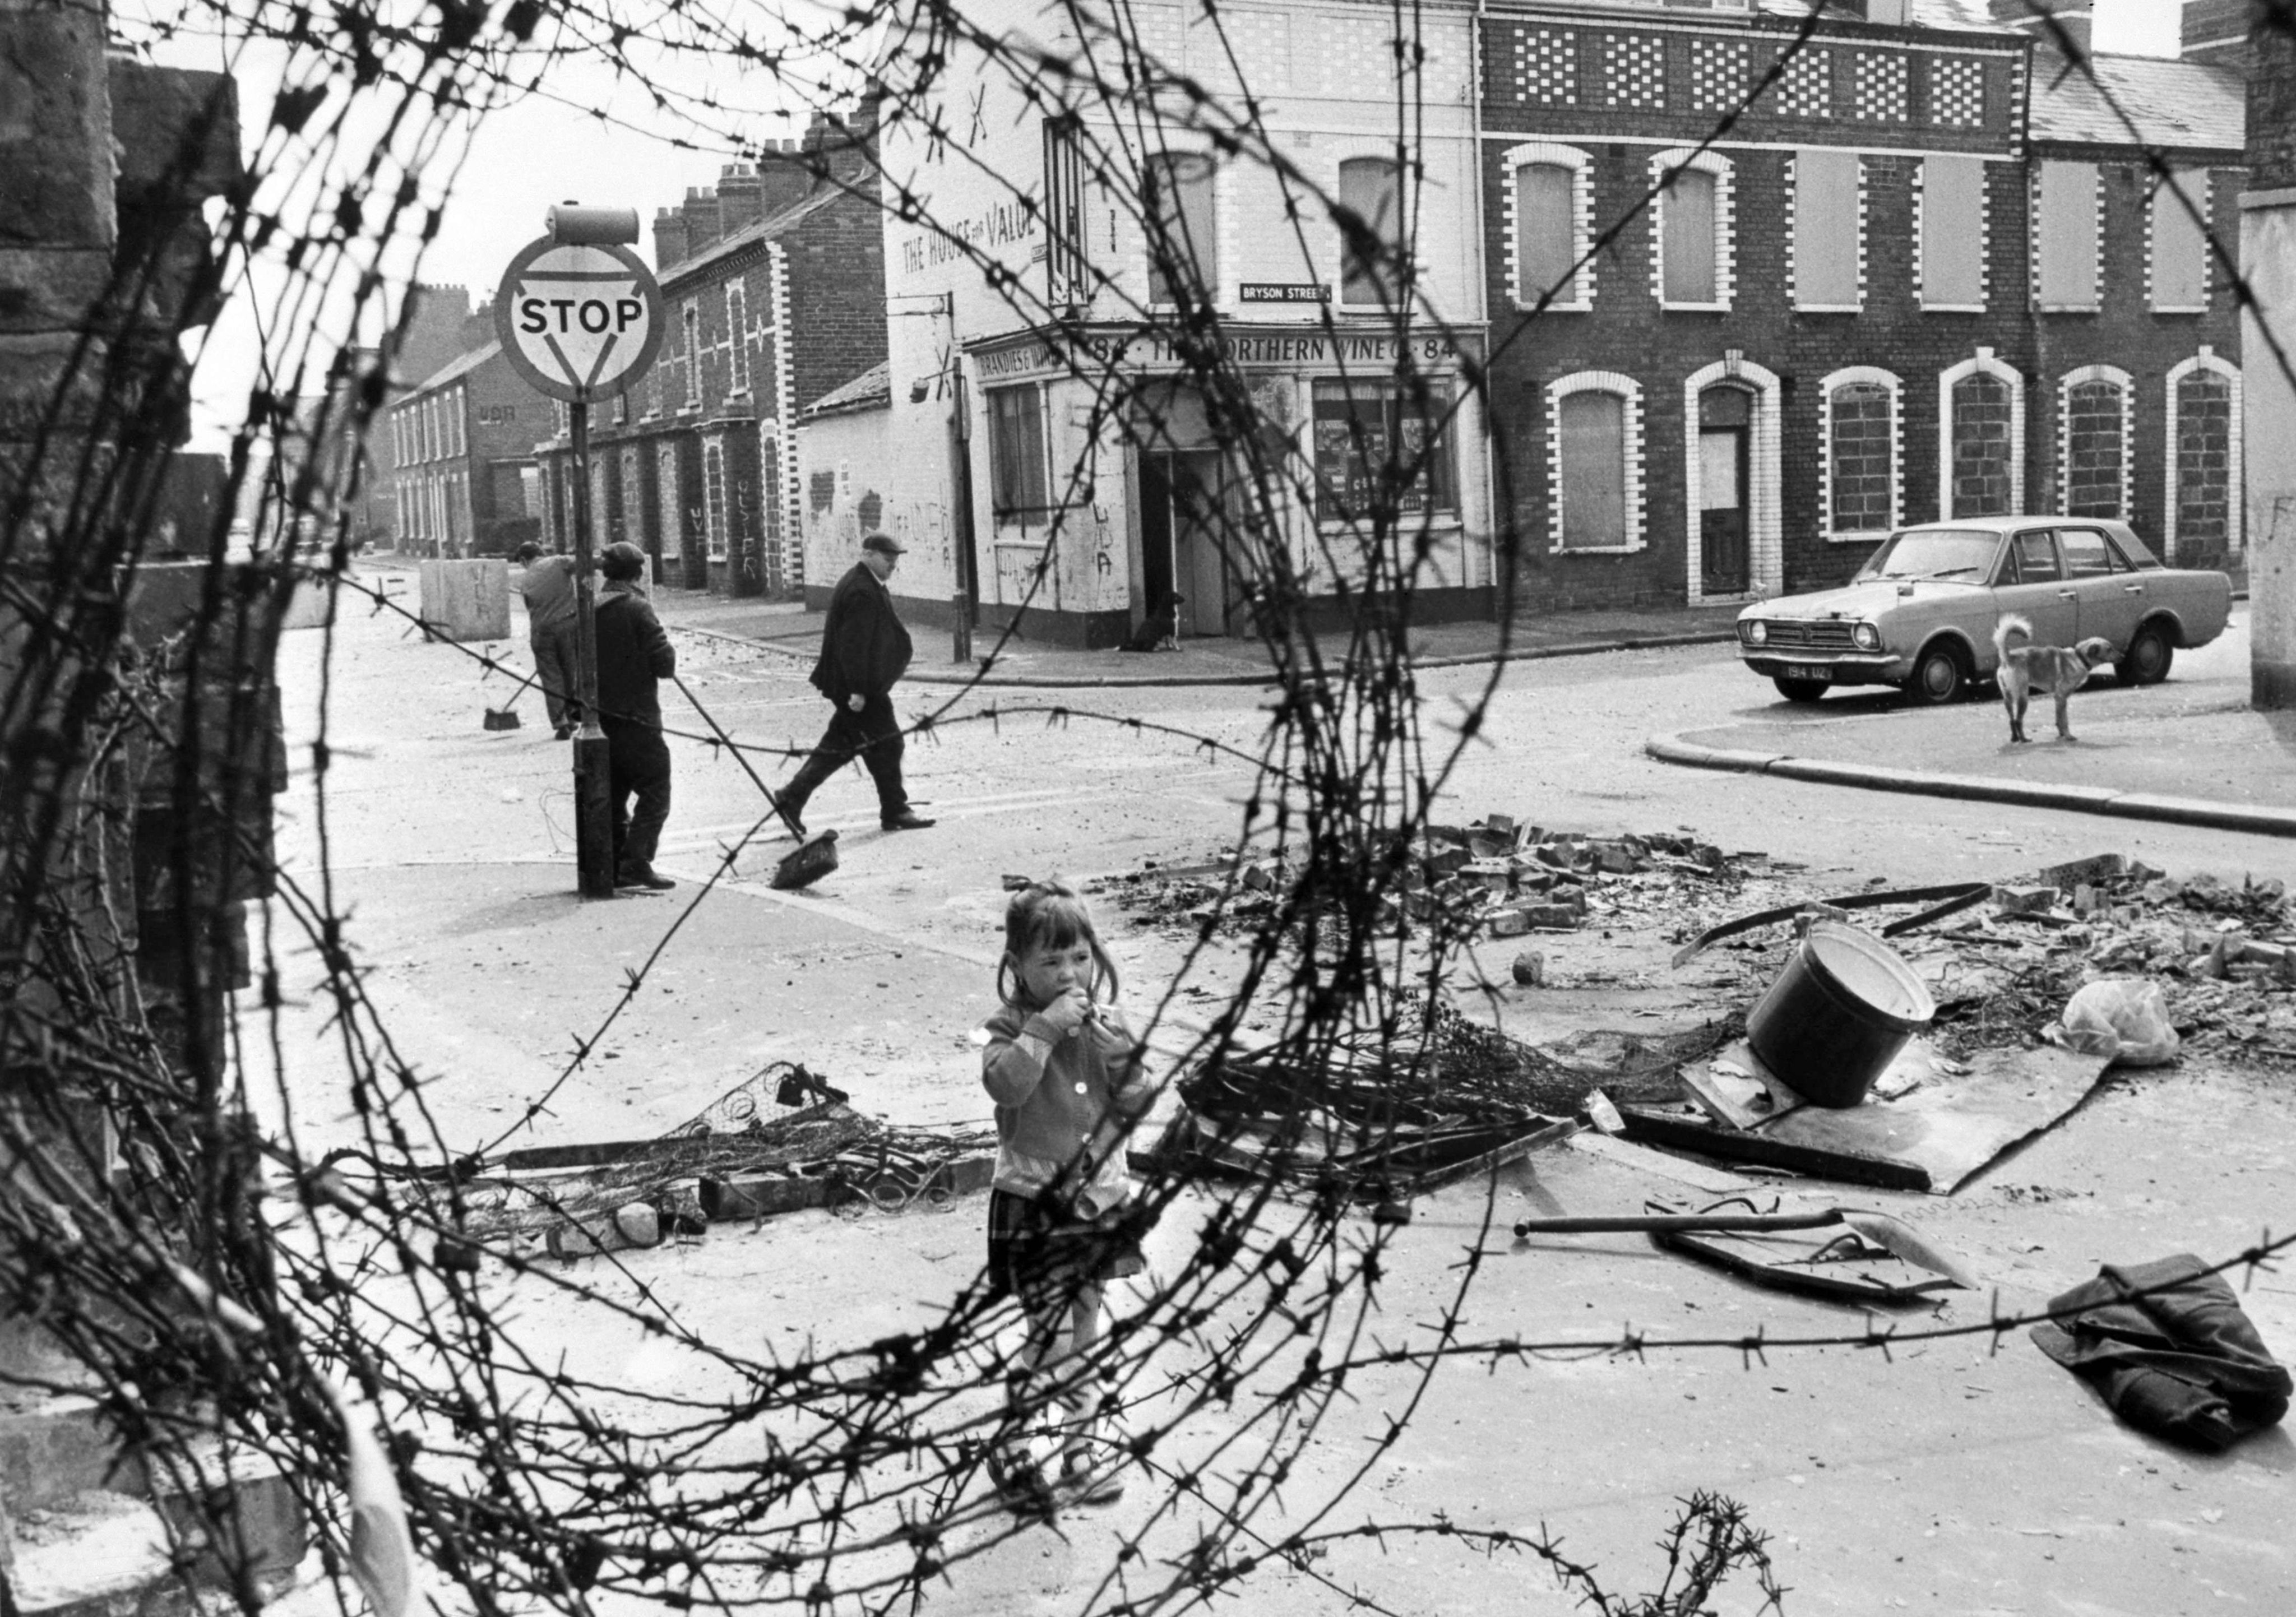 A girl is seen on a street near a roadblock in a Catholic area of Belfast, Northern Ireland’s capital, in 1974. More than 3,500 people were killed during three decades of sectarian conflict over British rule in Northern Ireland, which began in the late 1960s. Photo: AFP